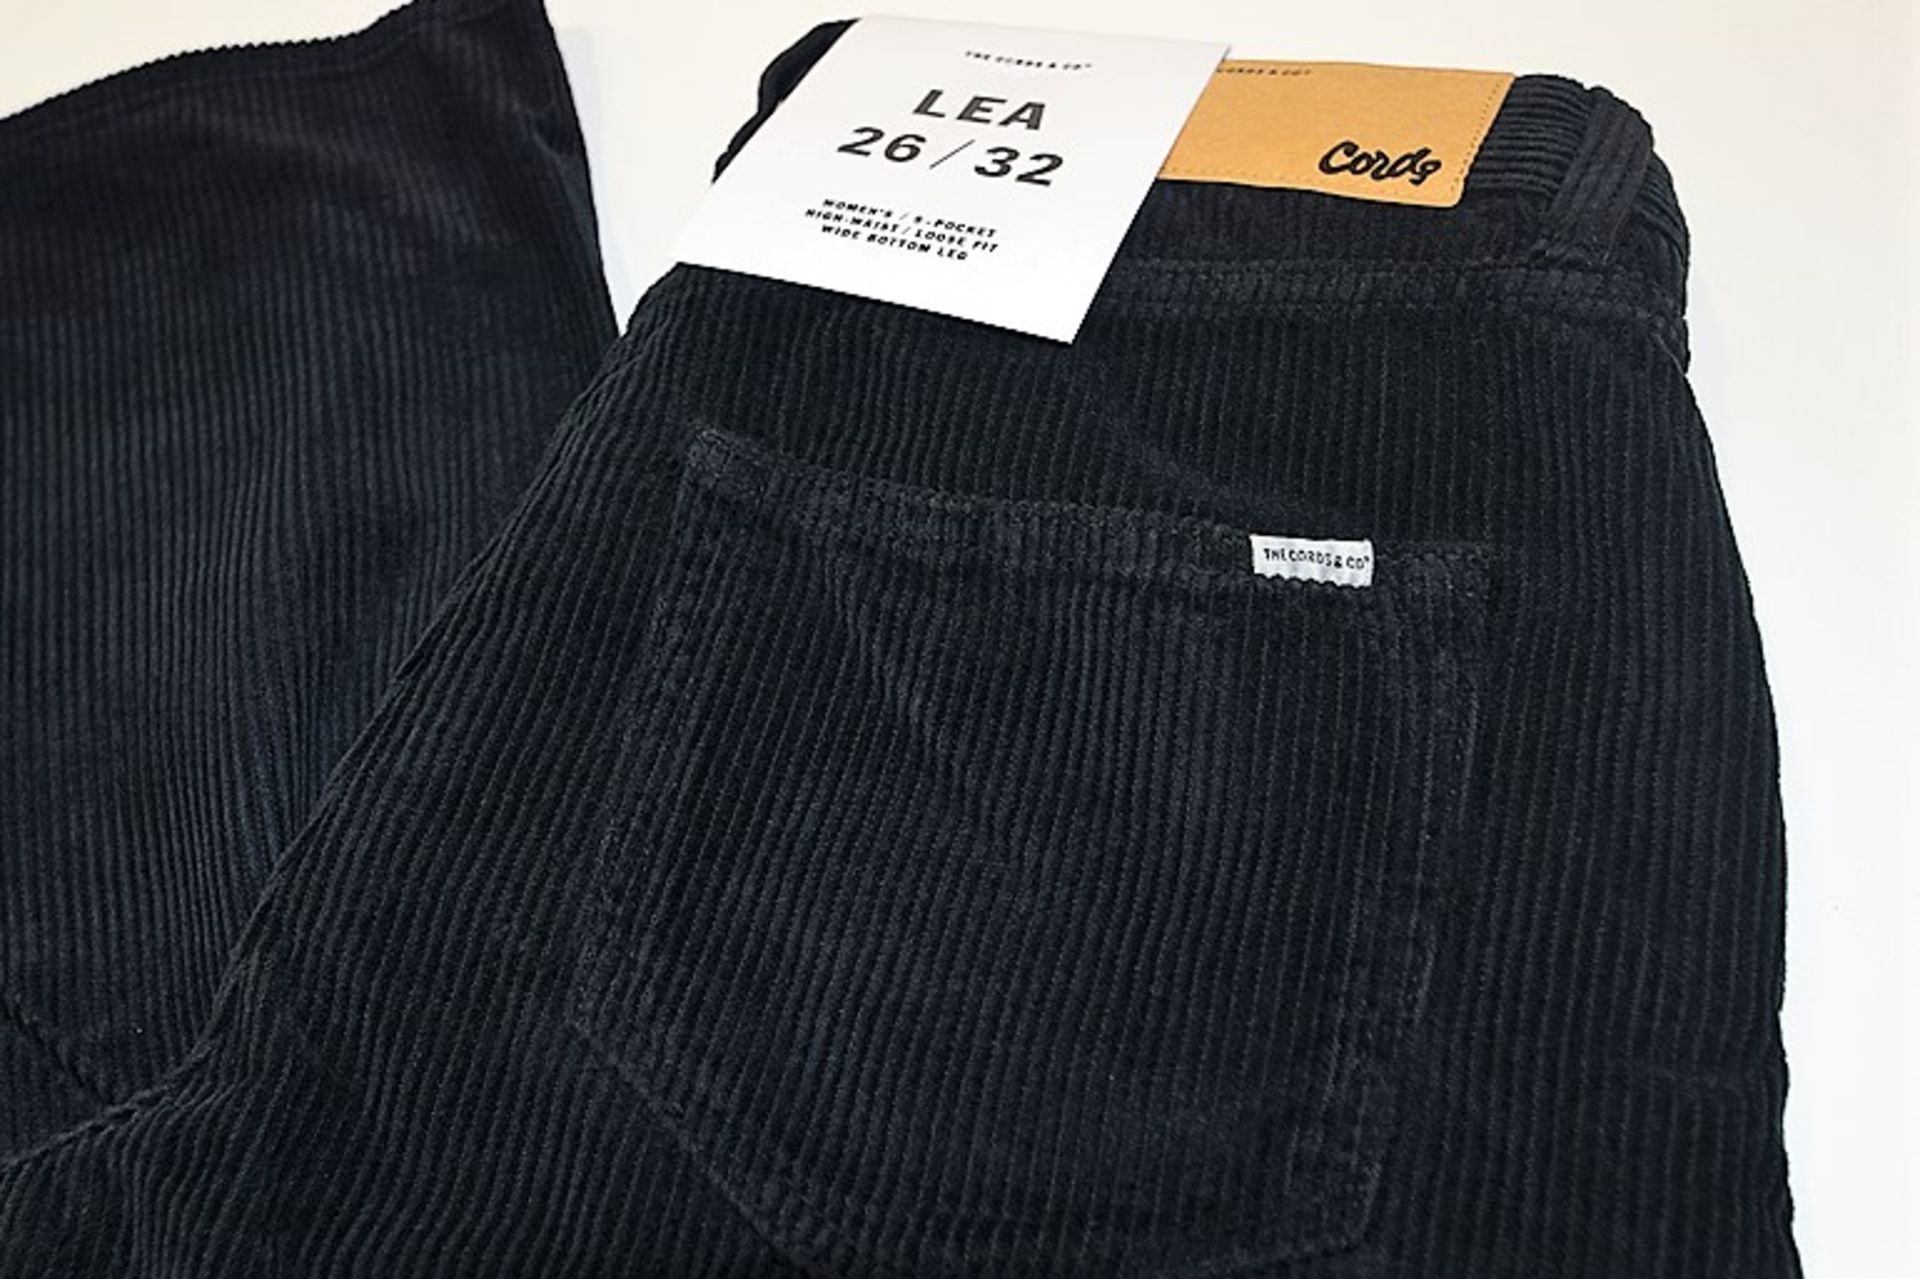 The Cords & Co. "Lea" Women's/ High-Waist/ Loose Fit/ Wide Bottom Pants MSRP $160 - Image 4 of 7